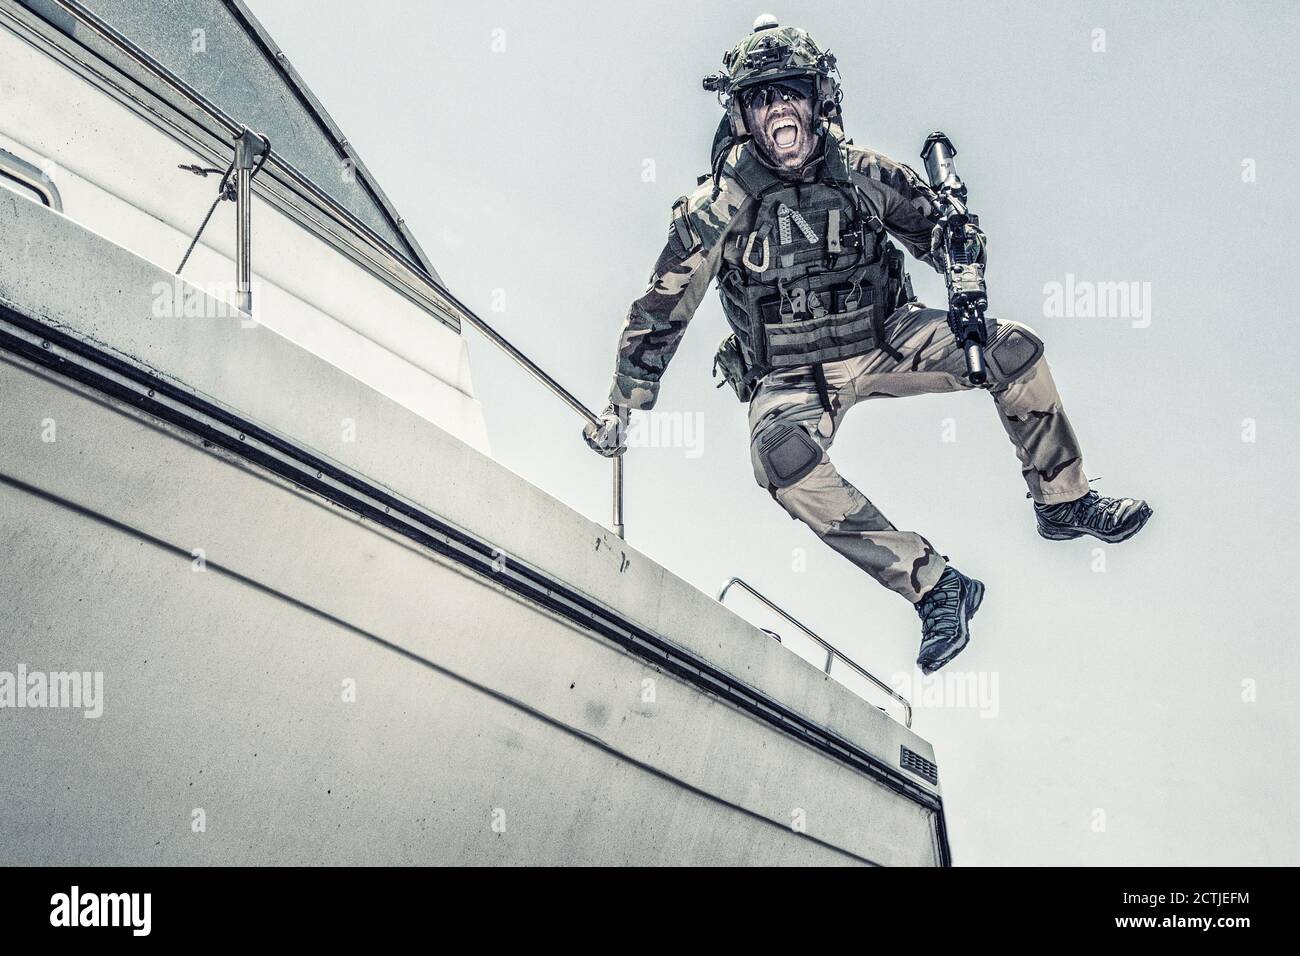 Army commando, special forces soldier equipped with body armour and battle helmet with radio headset, screaming and yelling while jumping from speed boat deck, landing on shore with assault rifle Stock Photo